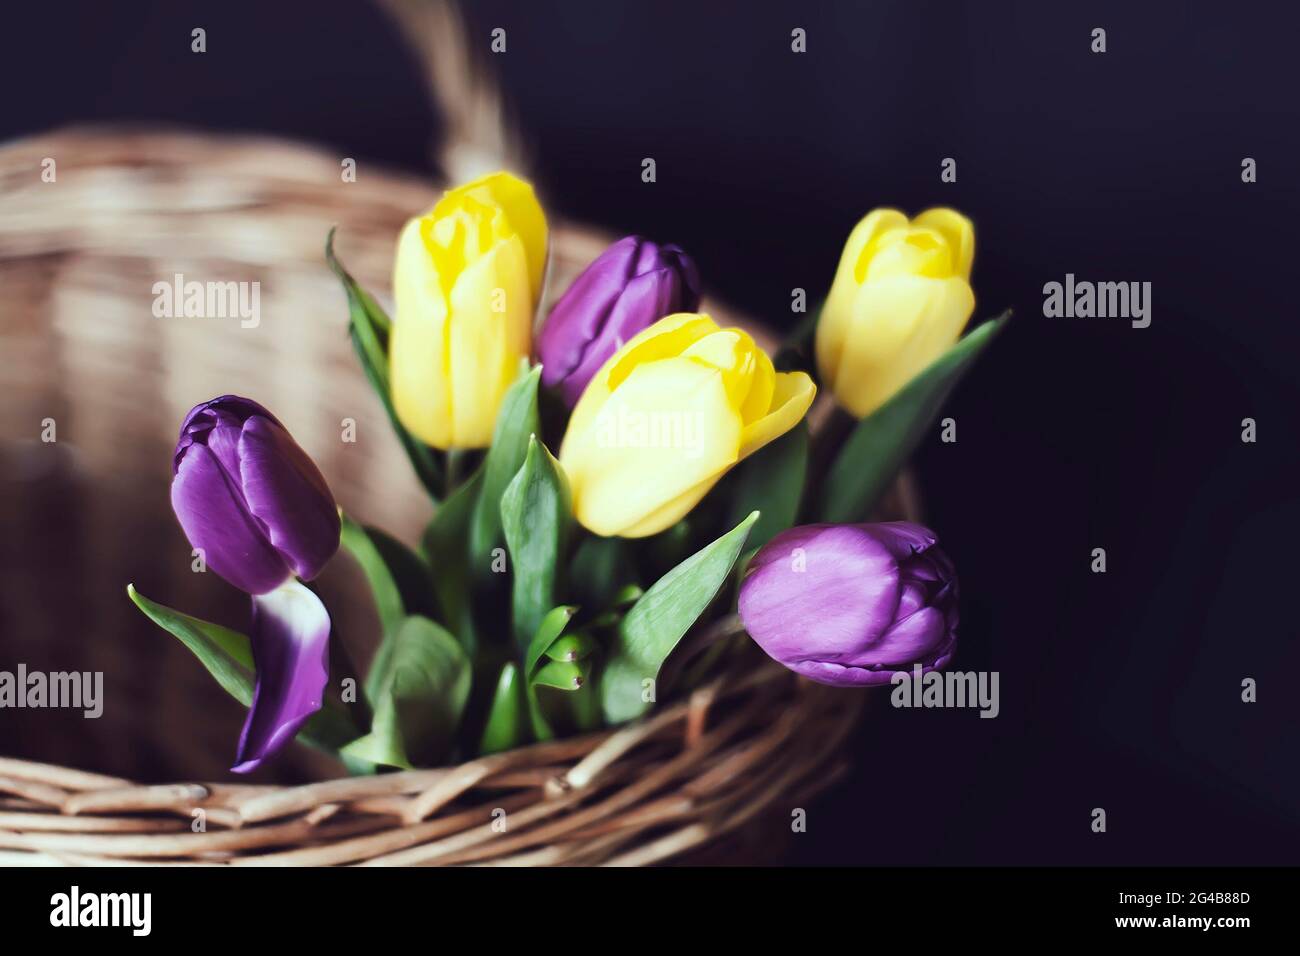 Spring floral background. Beautiful yellow and purple tulip flowers in a wicker basket. Stock Photo